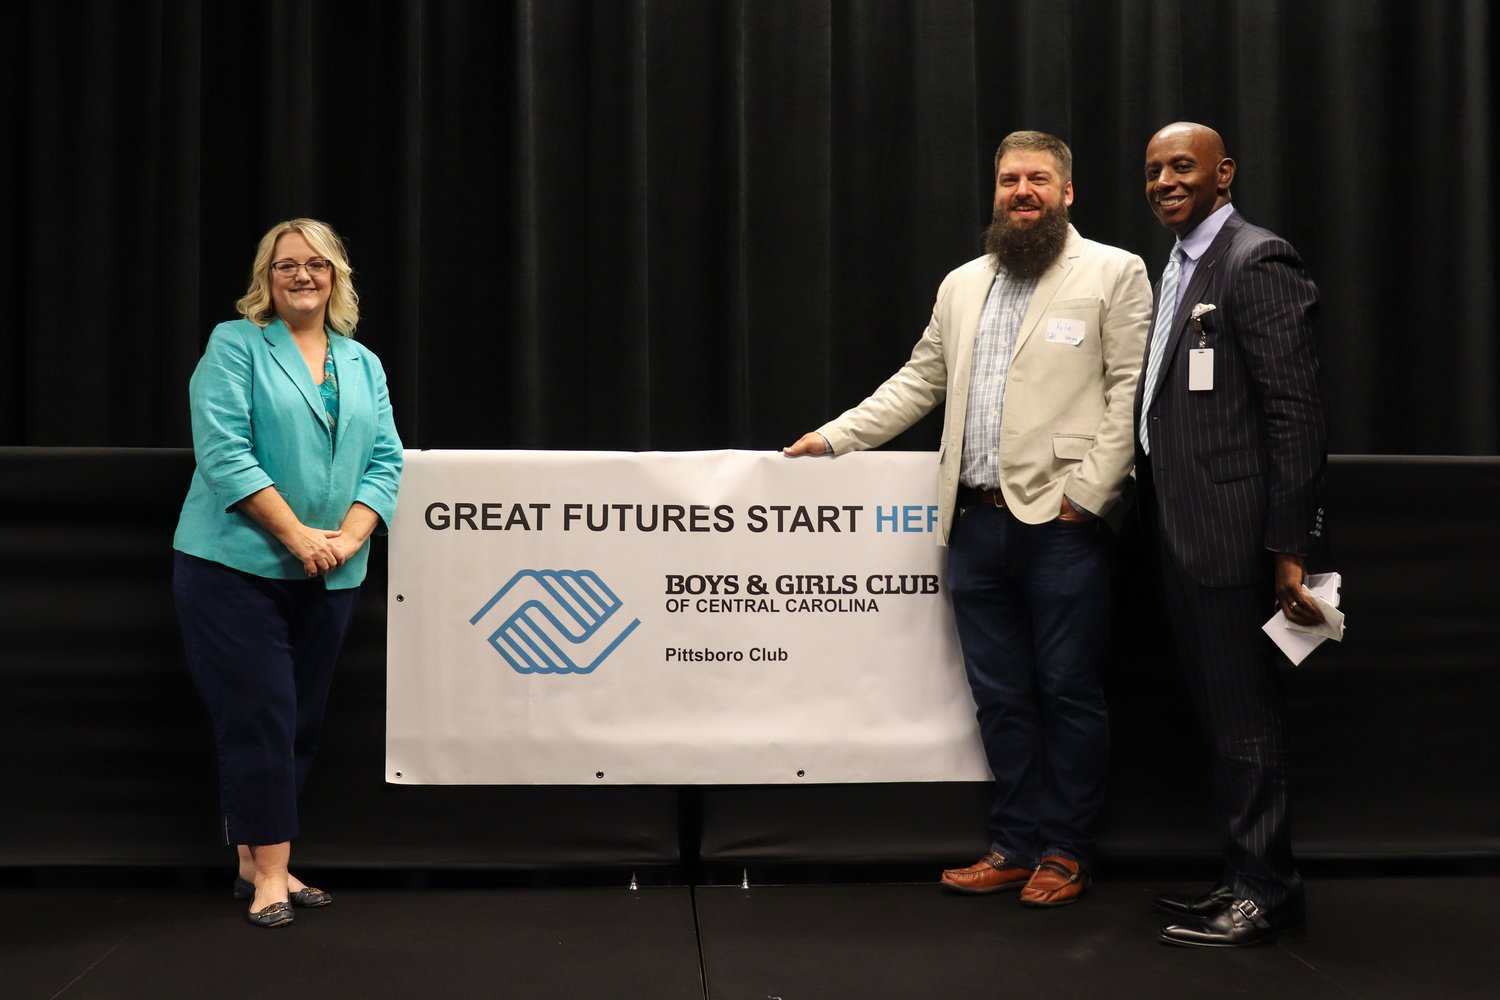 Dr. Amanda Hartness of Chatham County Schools (from left), Pittsboro Commissioner Kyle Shipp and Dr. Anthony Jackson, superintendent of Chatham County Schools, pose after last Wednesday’s fundraising breakfast for the Boys & Girls Club of Pittsboro. Shipp helped spearhead efforts to start the club; Jackson served as the event’s keynote speaker.